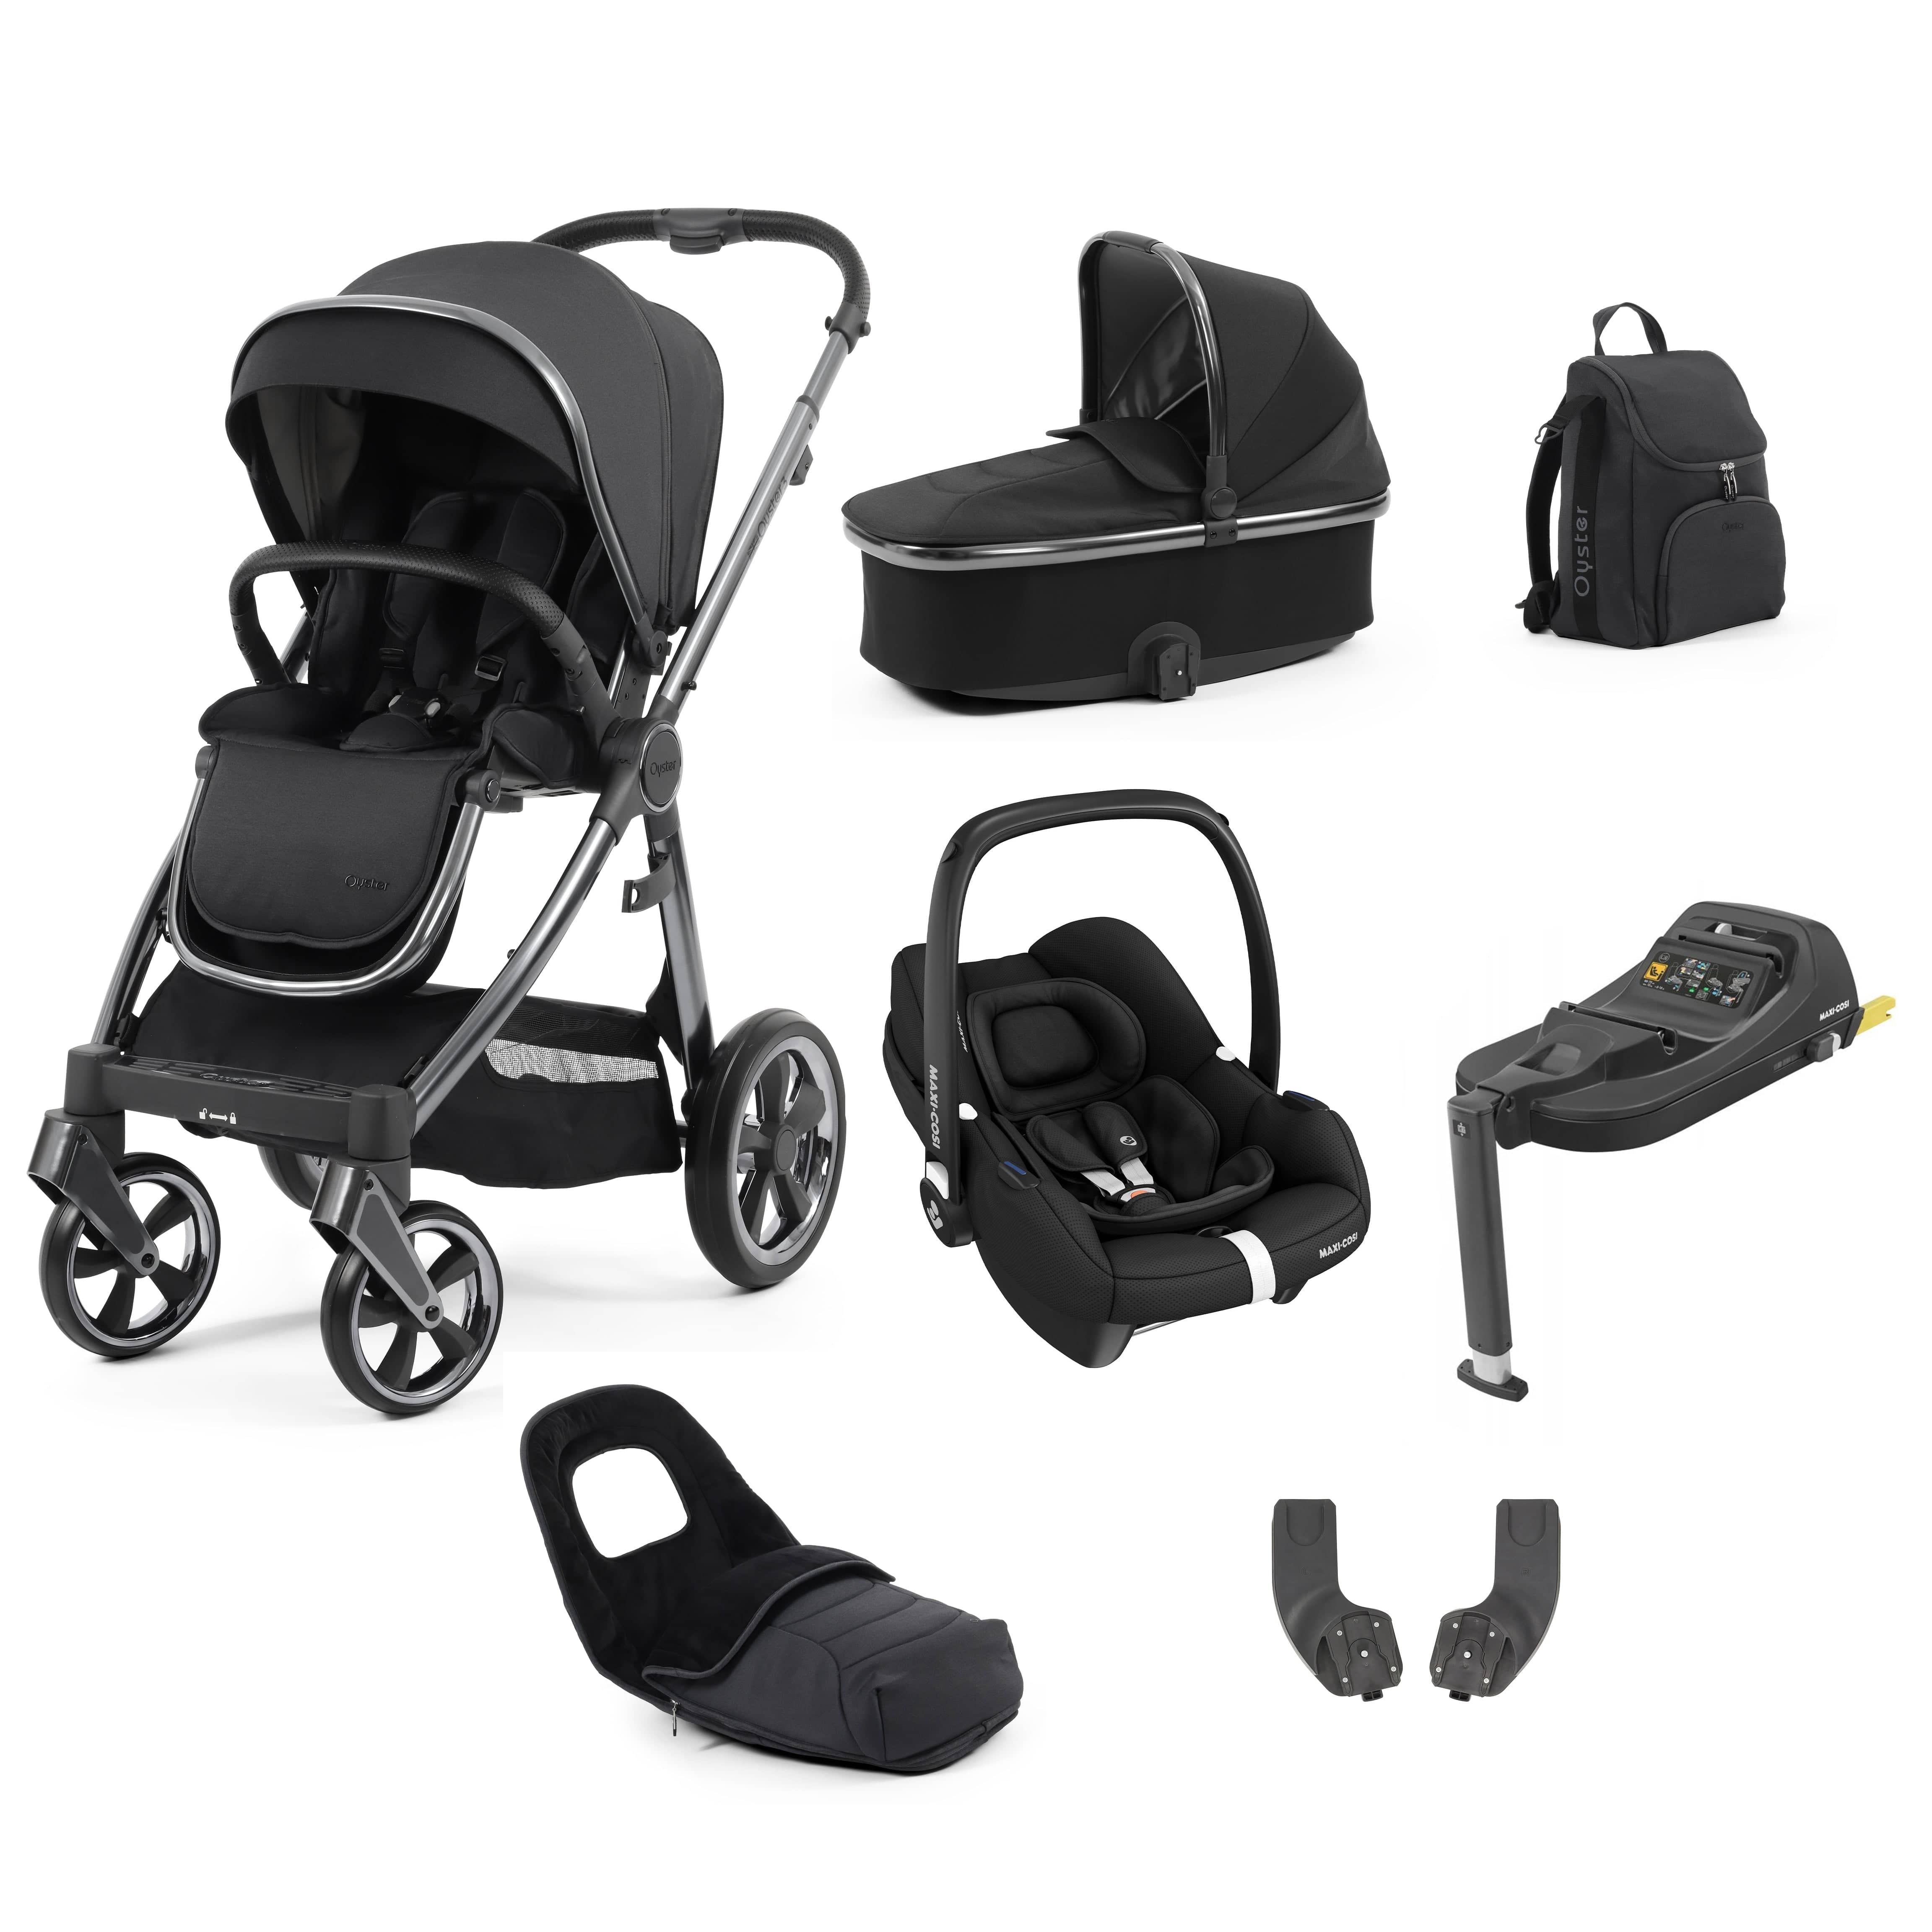 BabyStyle travel systems Babystyle Oyster 3 Luxury 7 Piece with Car Seat Bundle in Carbonite 14812-CRB